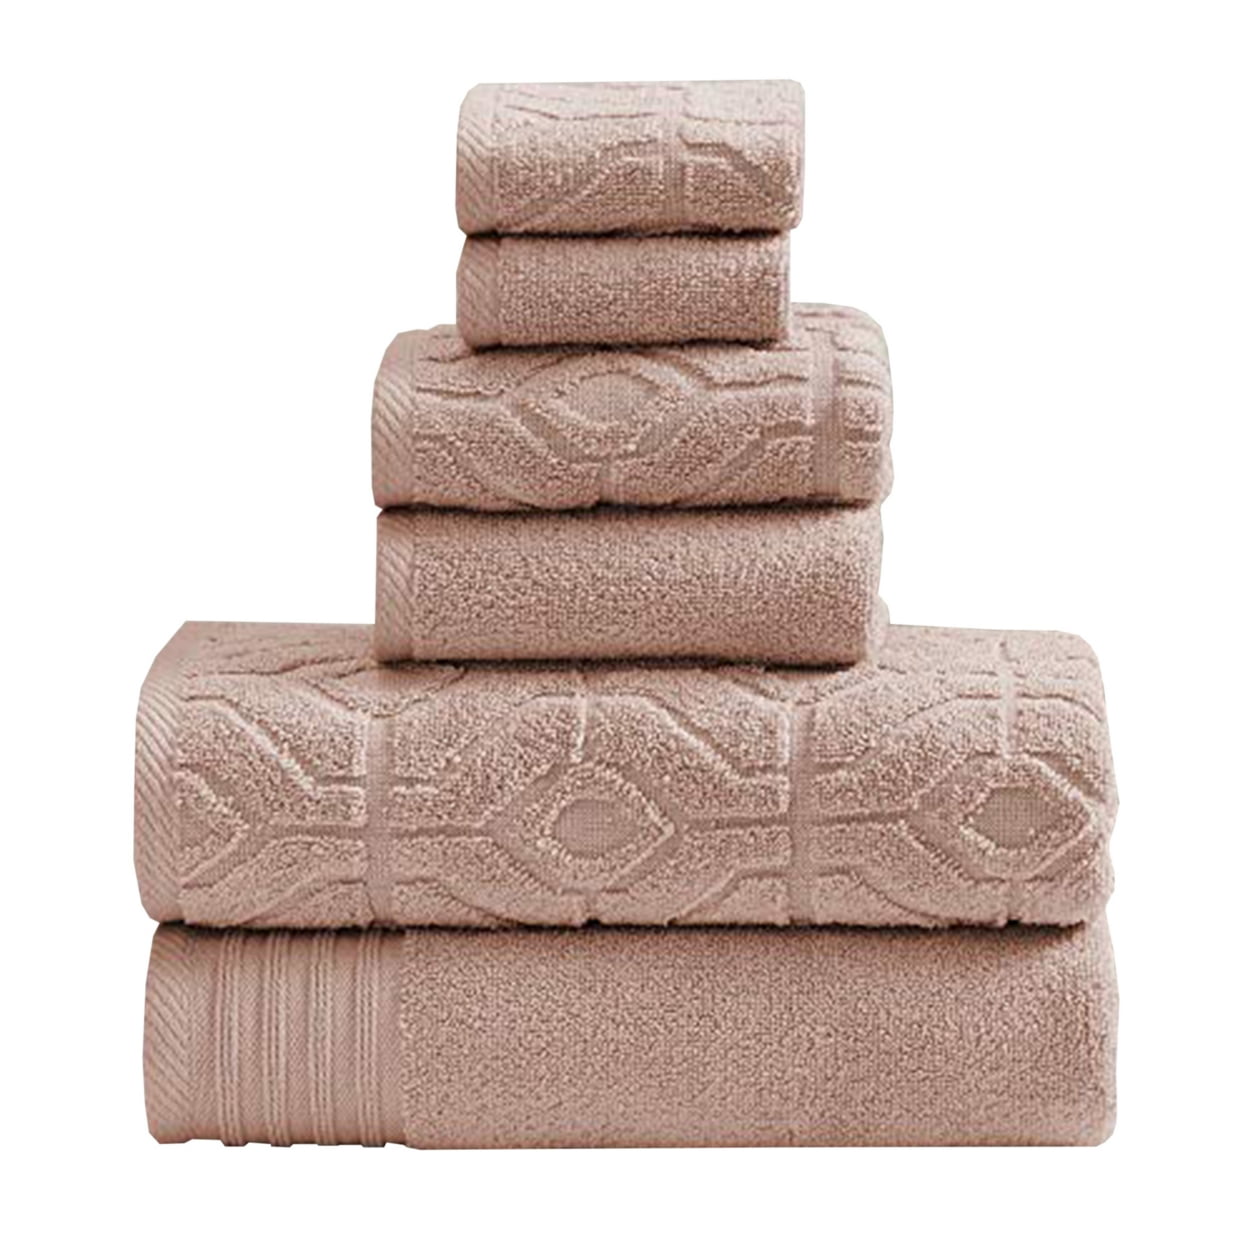 Picture of The Urban Port BM222857 Granada Yarn Dyed Towel Set with Jacquard Stripe Pattern, Pink - 6 Piece